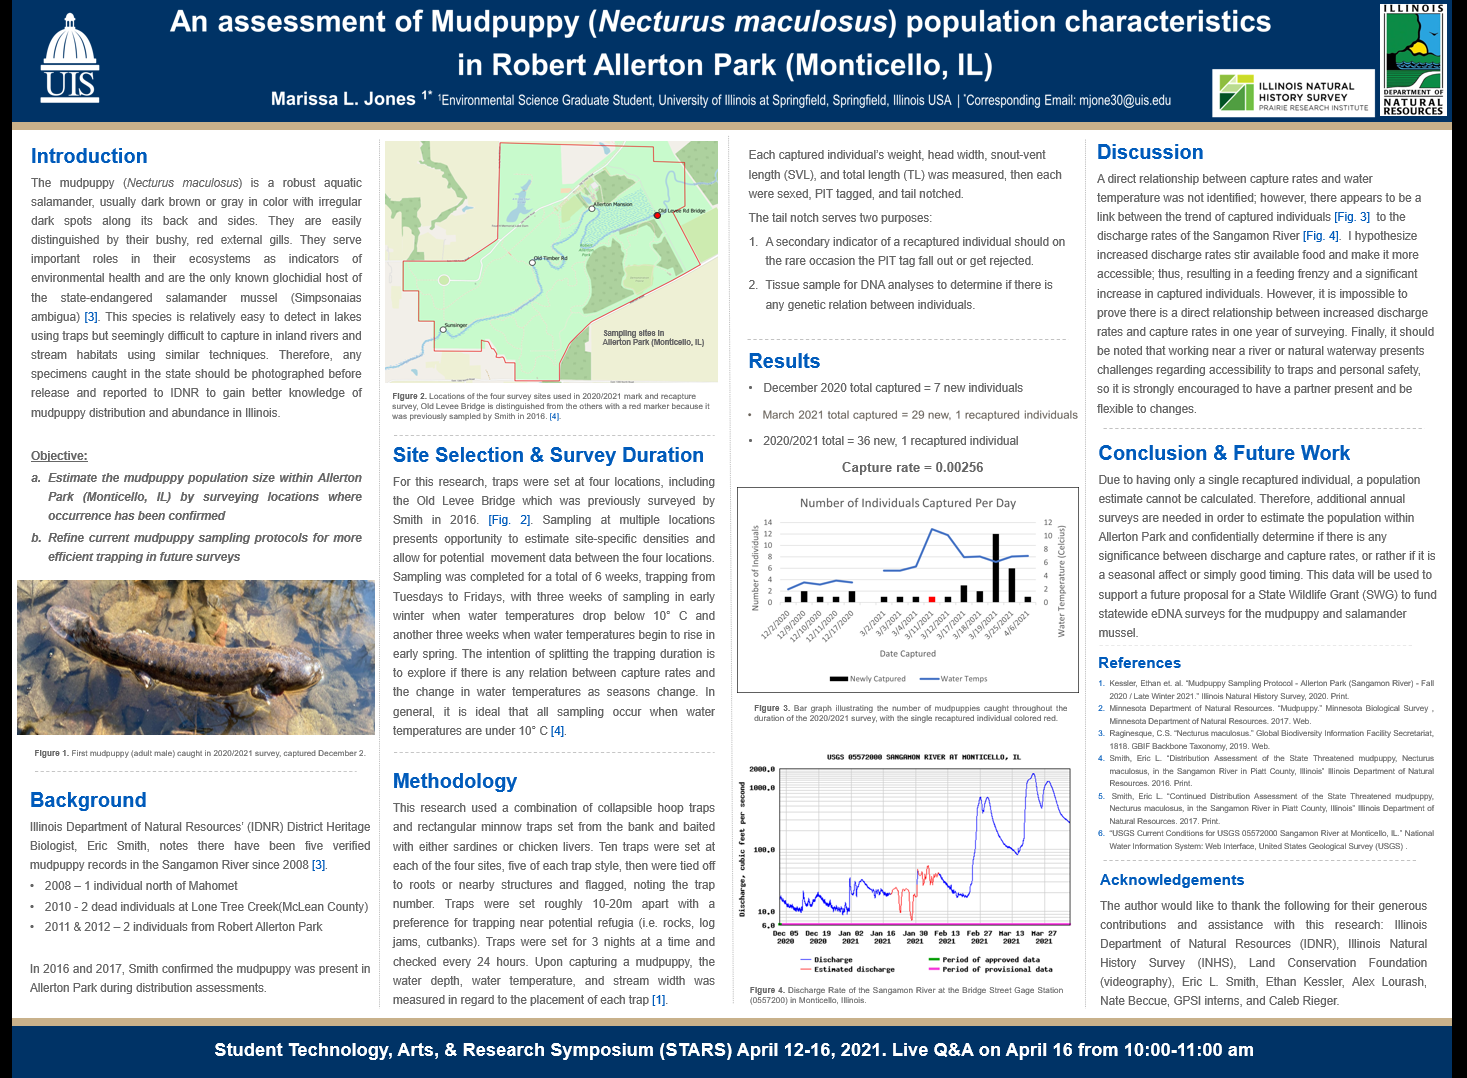 Showcase Image for An Assessment of Mudpuppy (Necturus maculosus) Population Characteristics in Robert Allerton Park (Monticello, IL